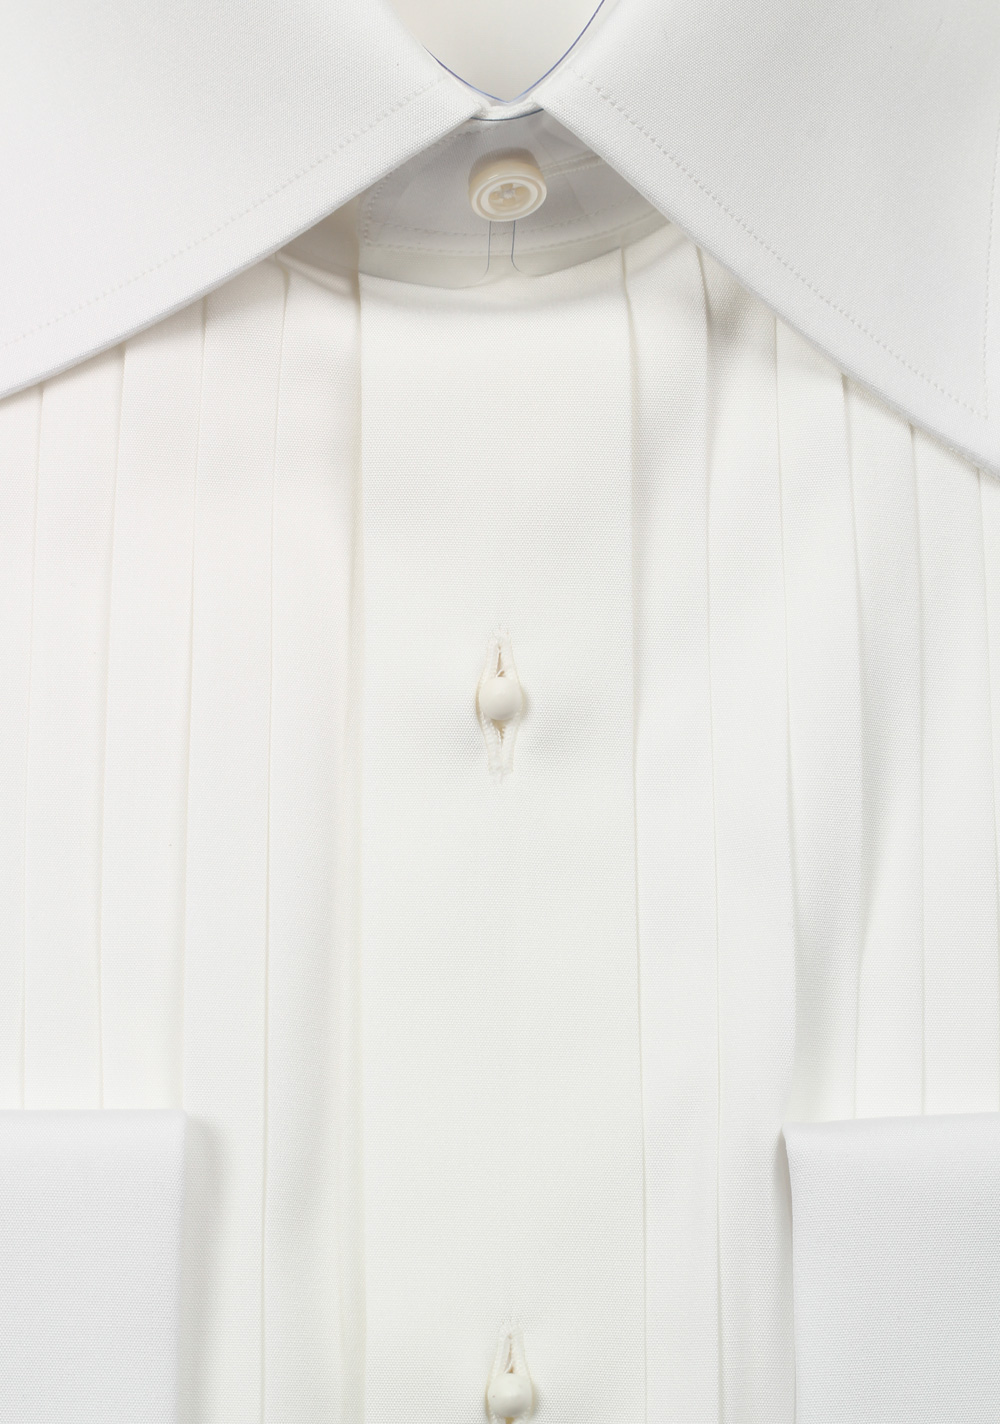 TOM FORD Solid White Signature Tuxedo Shirt With French Cuffs Slim Fit | Costume Limité